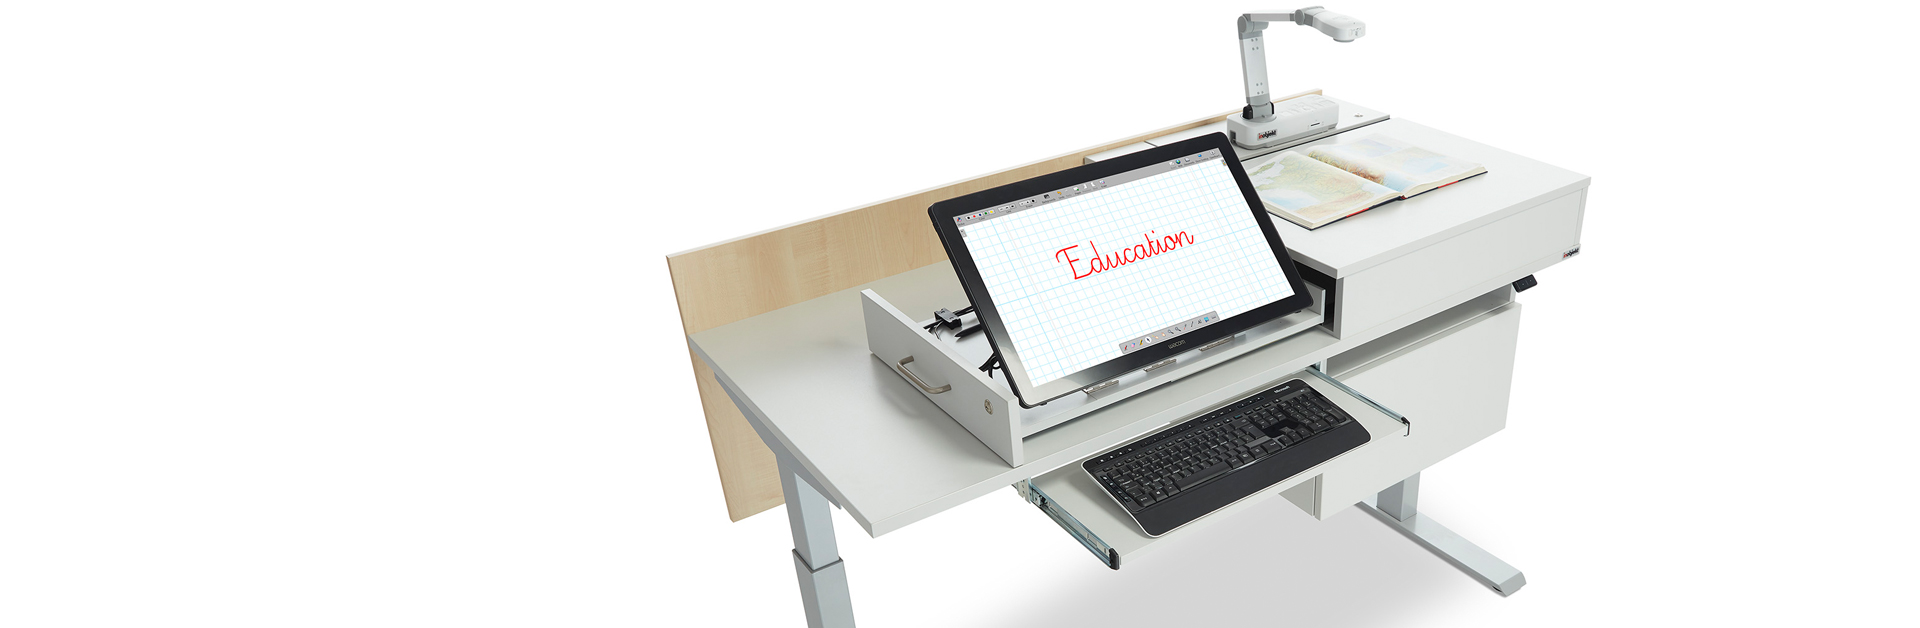 Header: ino.vation teacher's desk with interactive display, document camera with book as well as keyboard extension